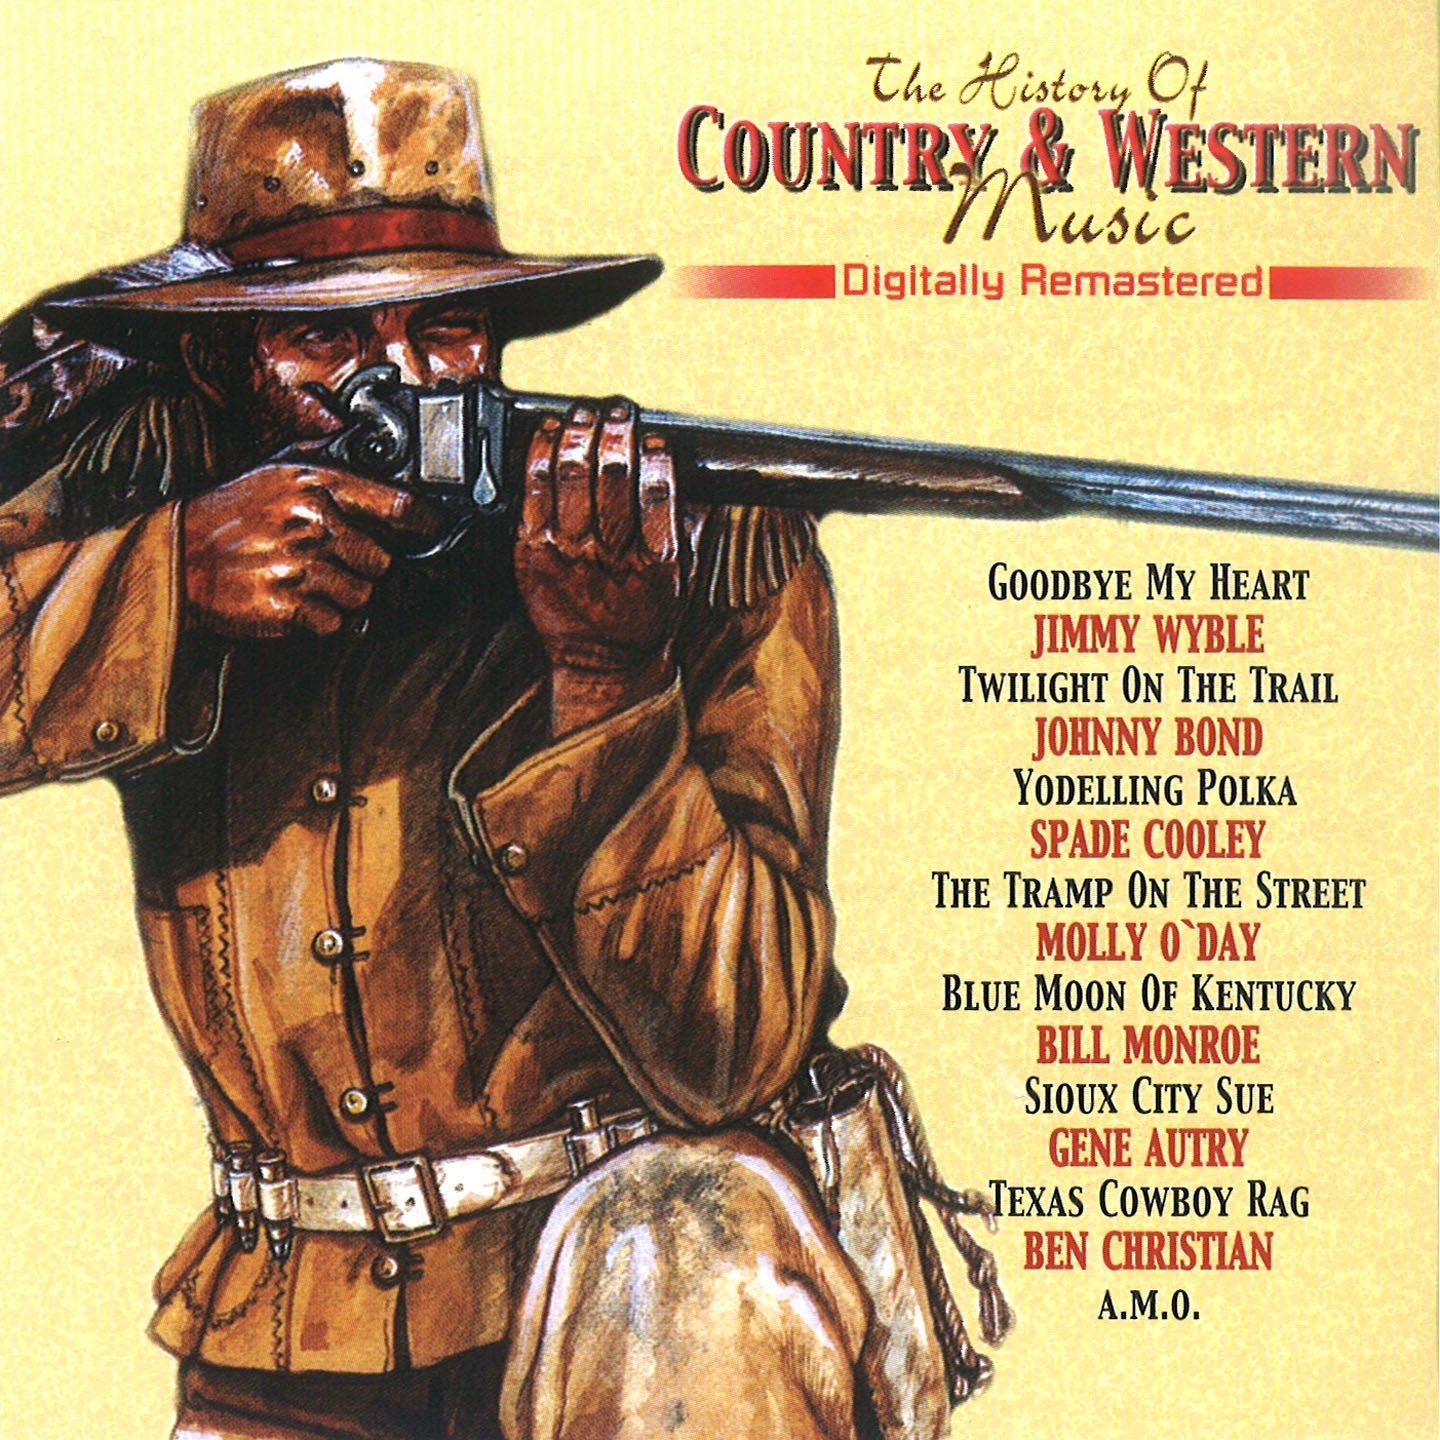 Country and western. The History of Country & Western Music. Western Countries. Western Rus. The best from the West Vol.1.